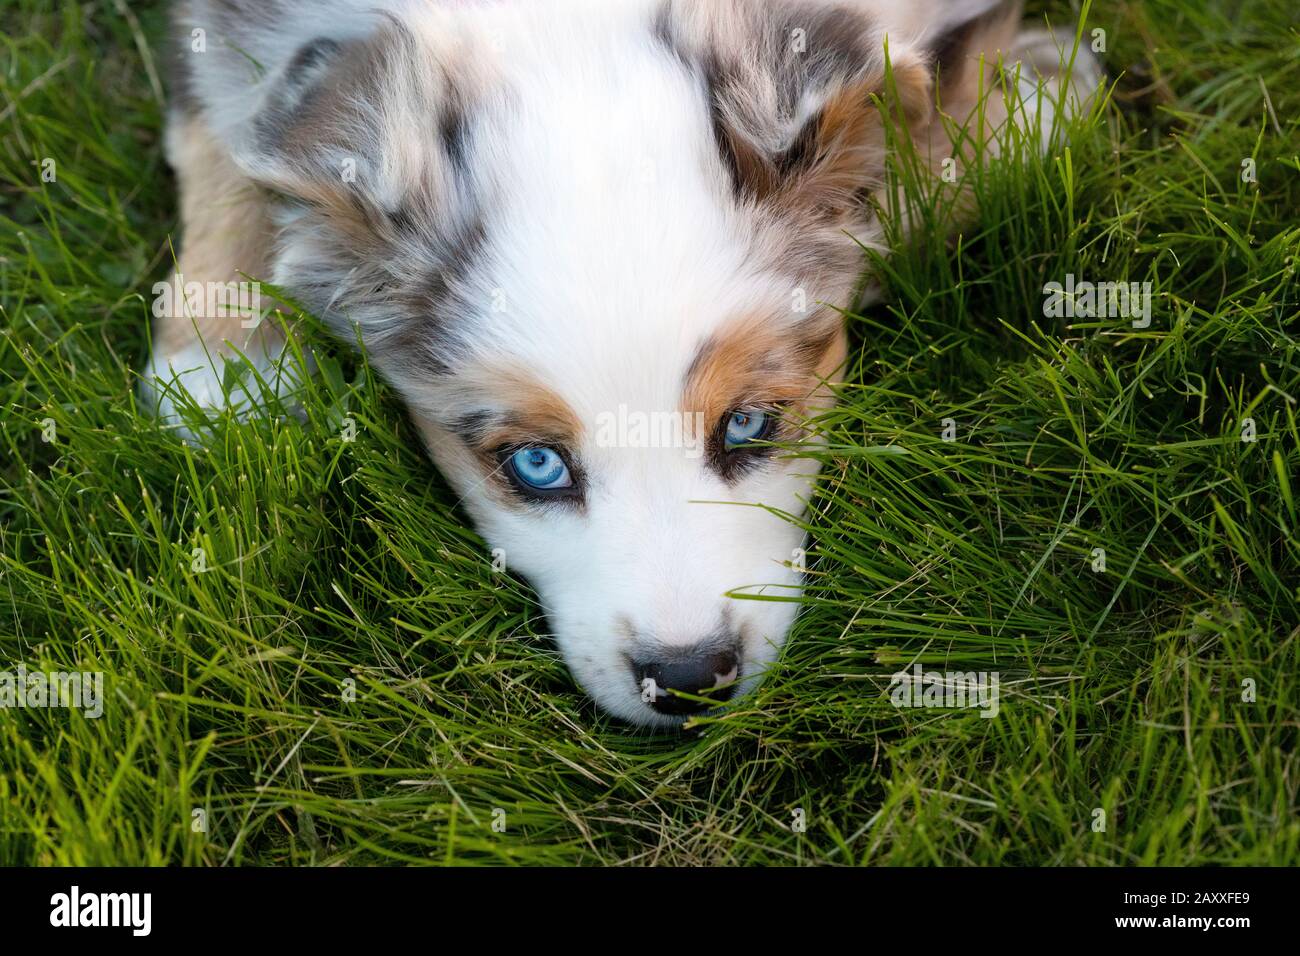 Australian Shepherd puppy with blue eyes, laying in the grass. Stock Photo